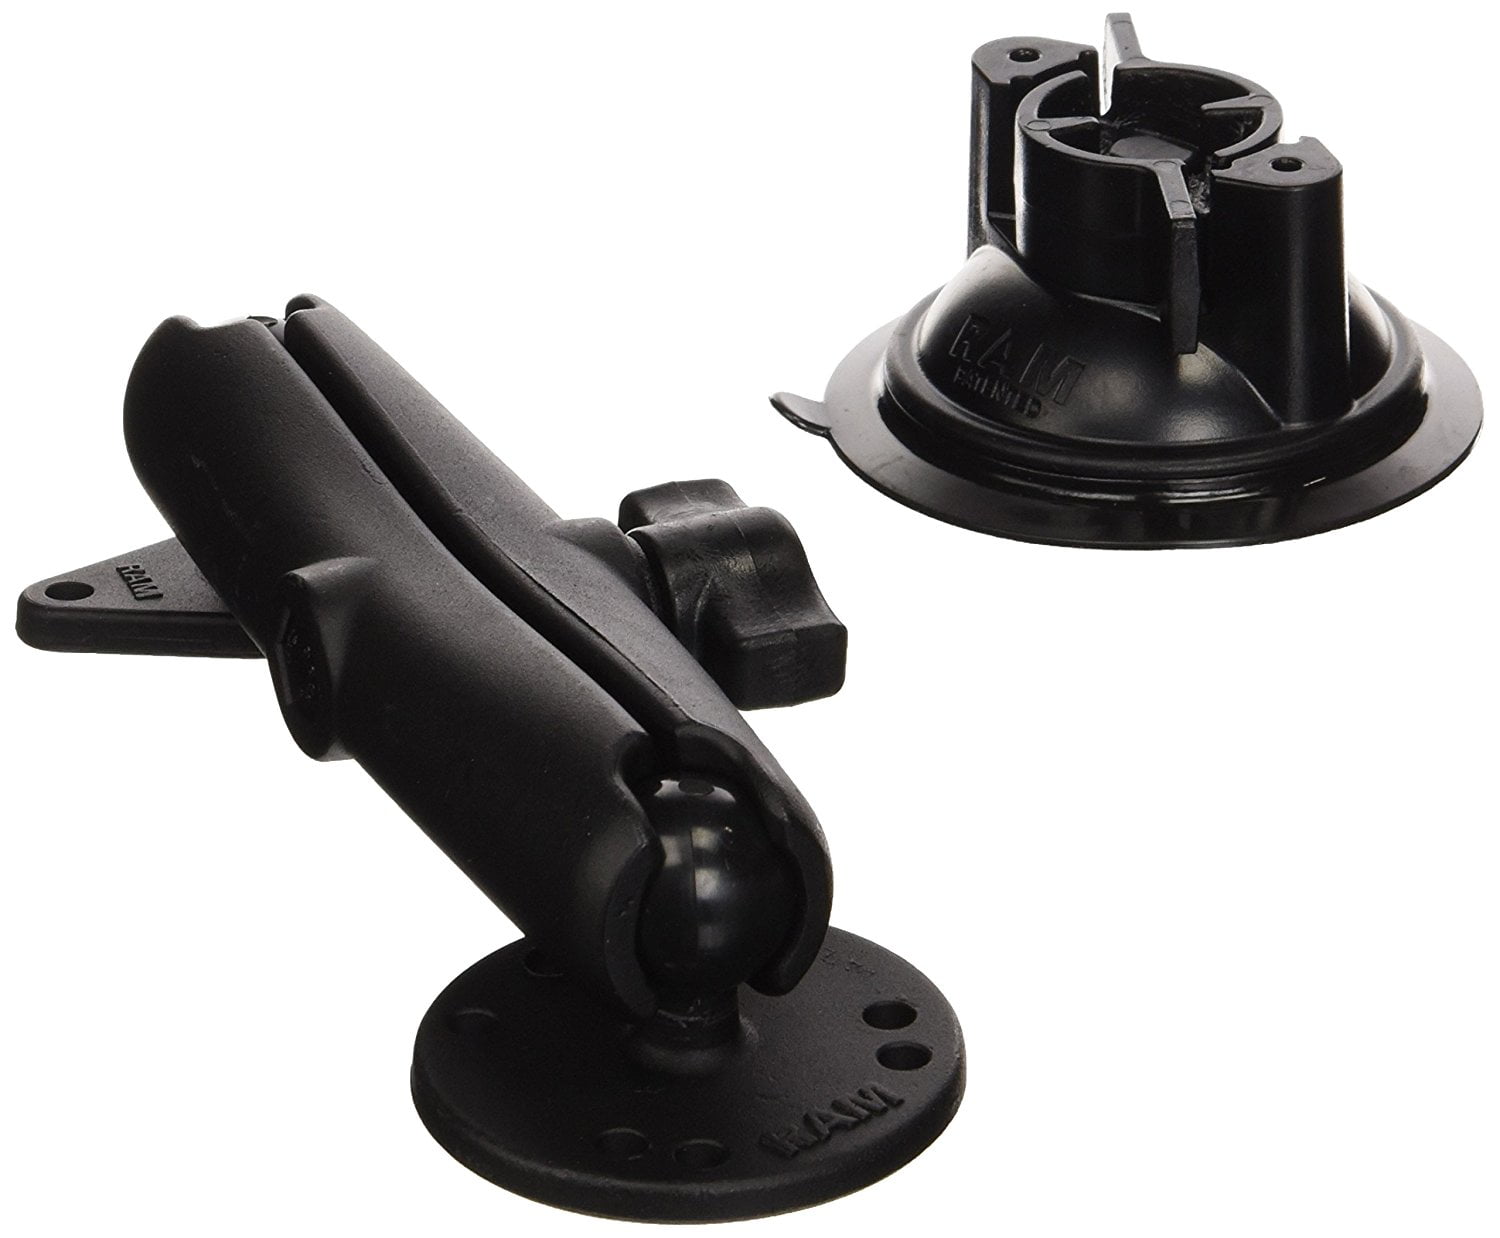 RAM MOUNTS Amps Hole Pattern RAM-101U-247-3 3 Max Width Clamp Mount with 1.5 Diameter Ball Double Socket Arm and 2.5 Round Base 